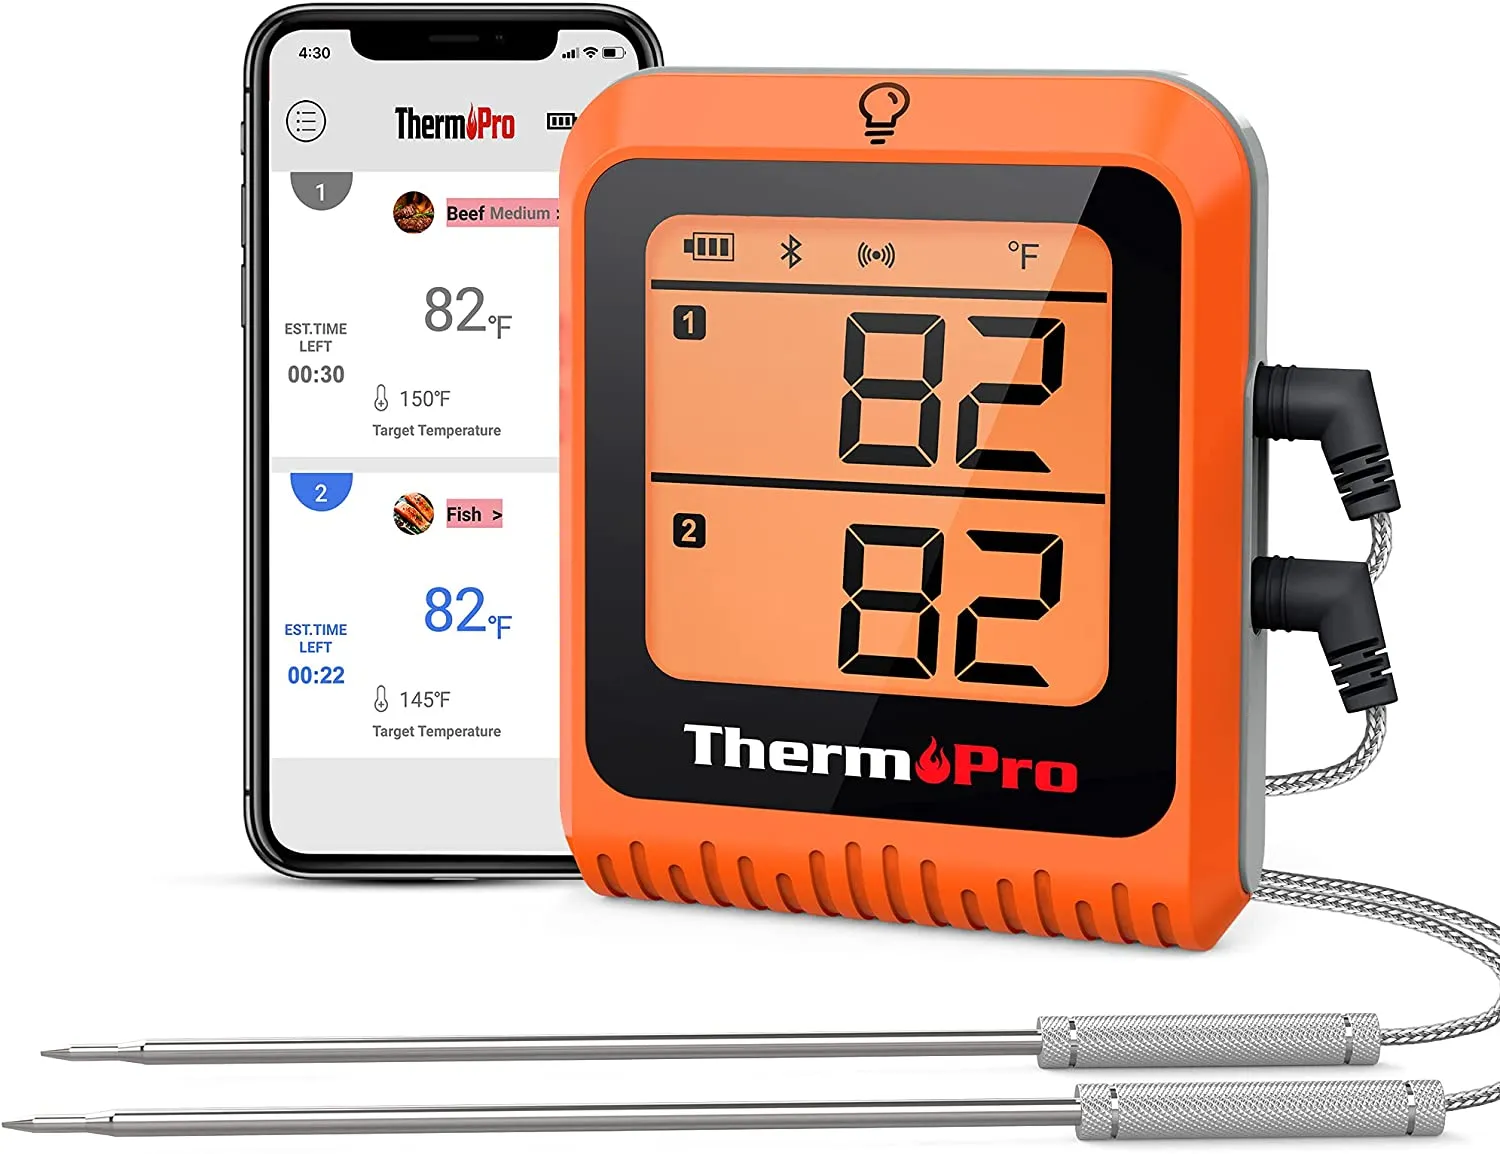 Thermo Pro Ultra Fast Digital Food Thermometer